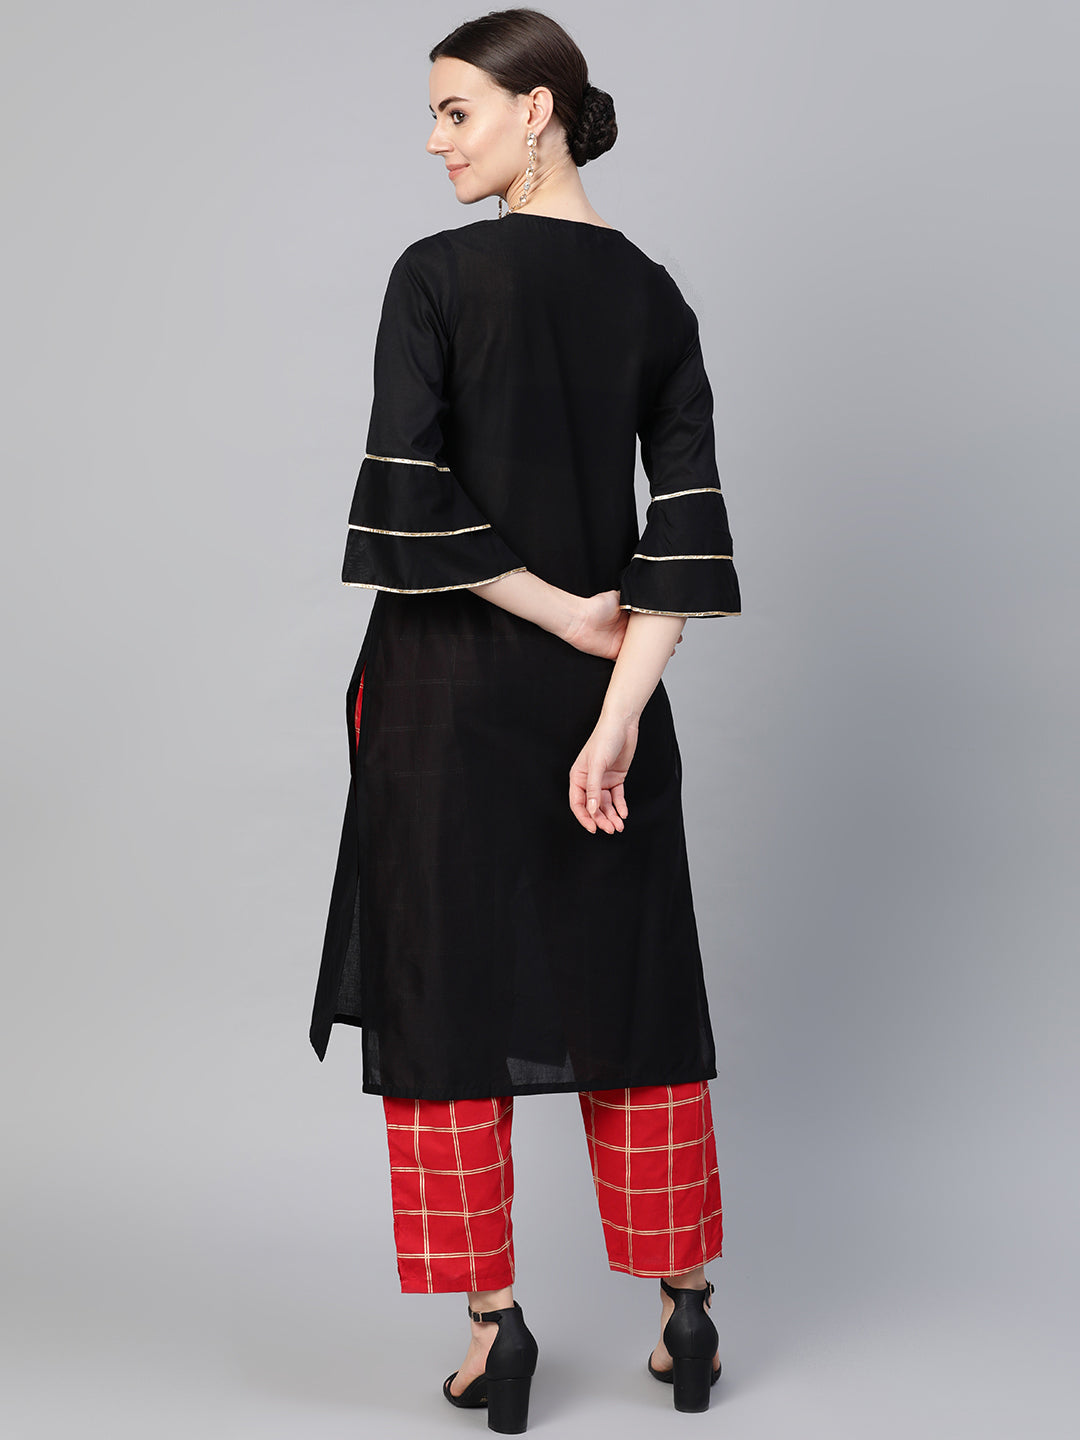 Charcoal With Red and Black Striped Pants | ZED